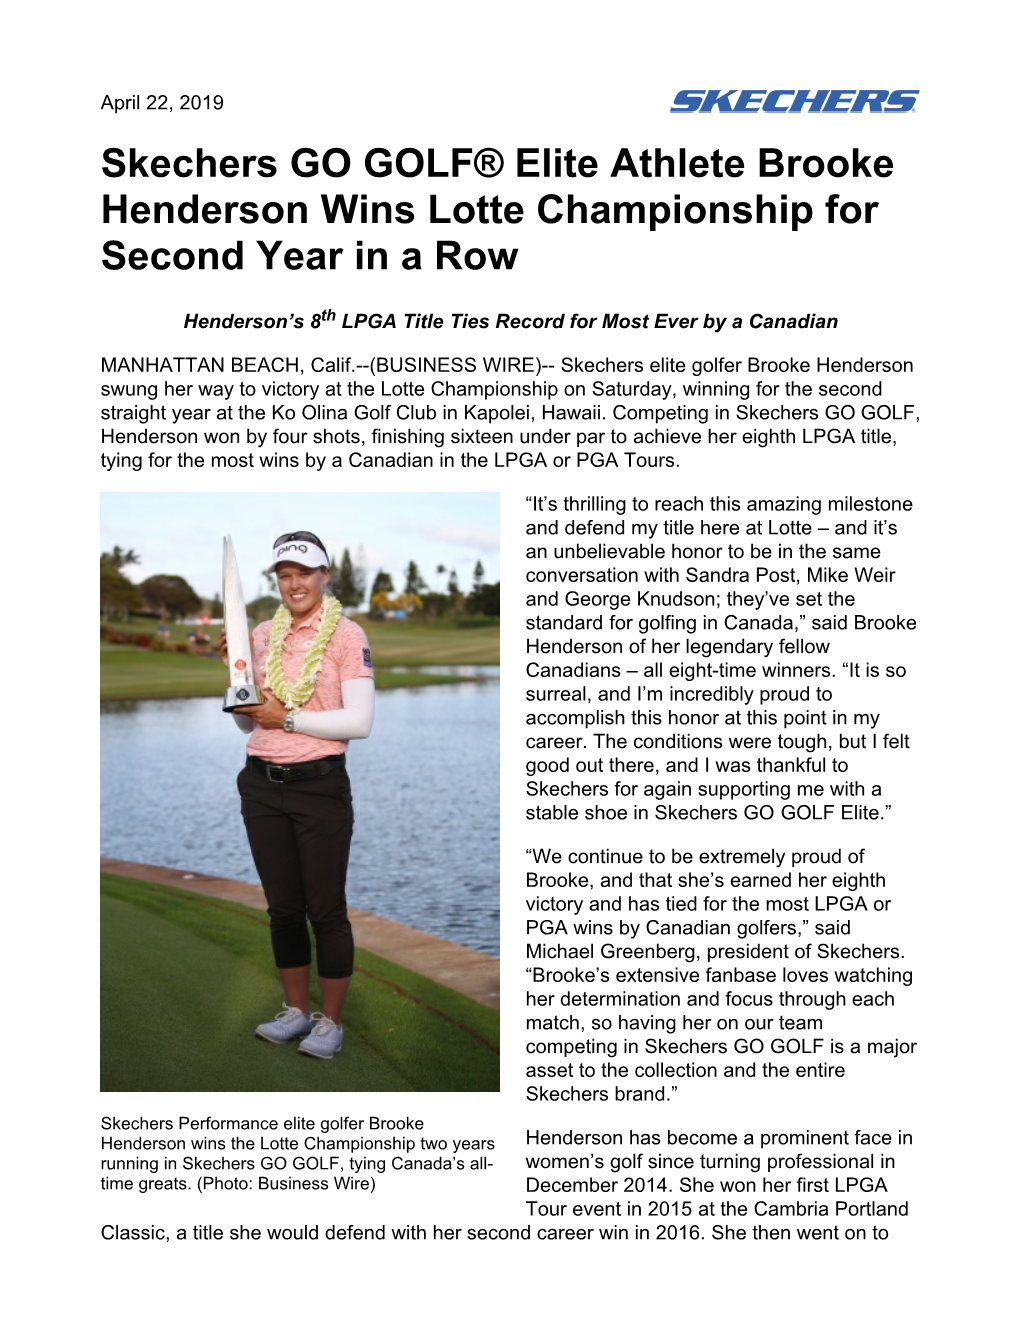 Skechers GO GOLF® Elite Athlete Brooke Henderson Wins Lotte Championship for Second Year in a Row